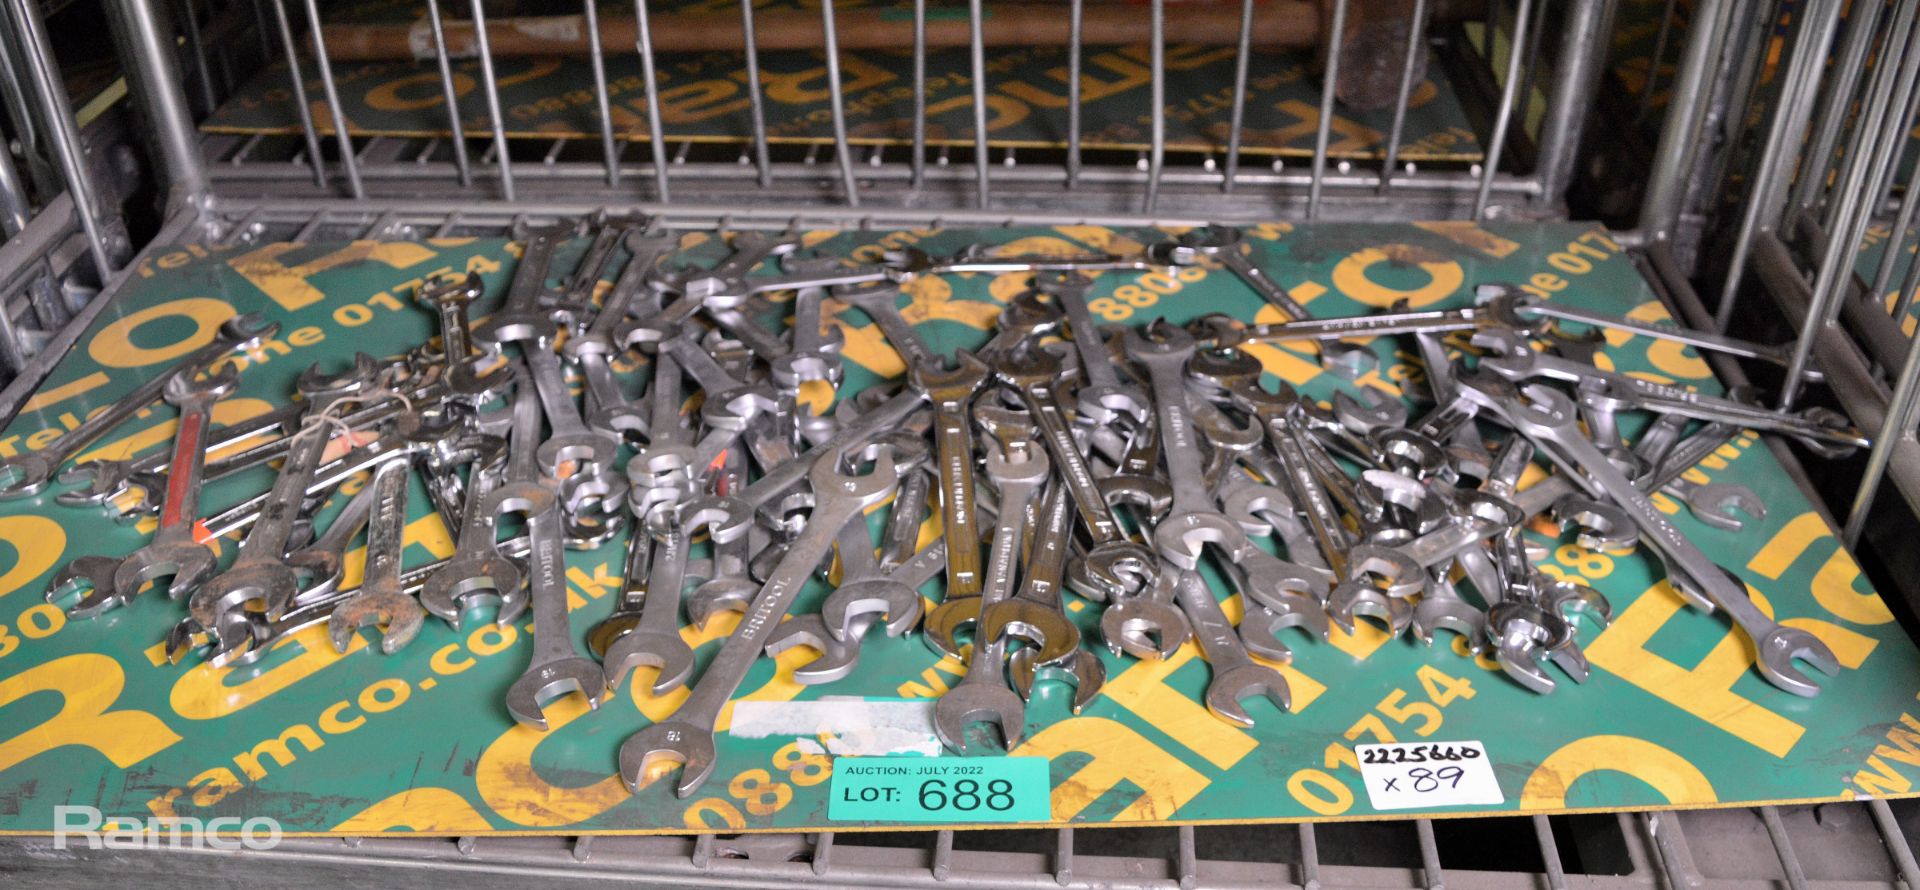 89x Open Ended Spanners - various sizes as per pictures